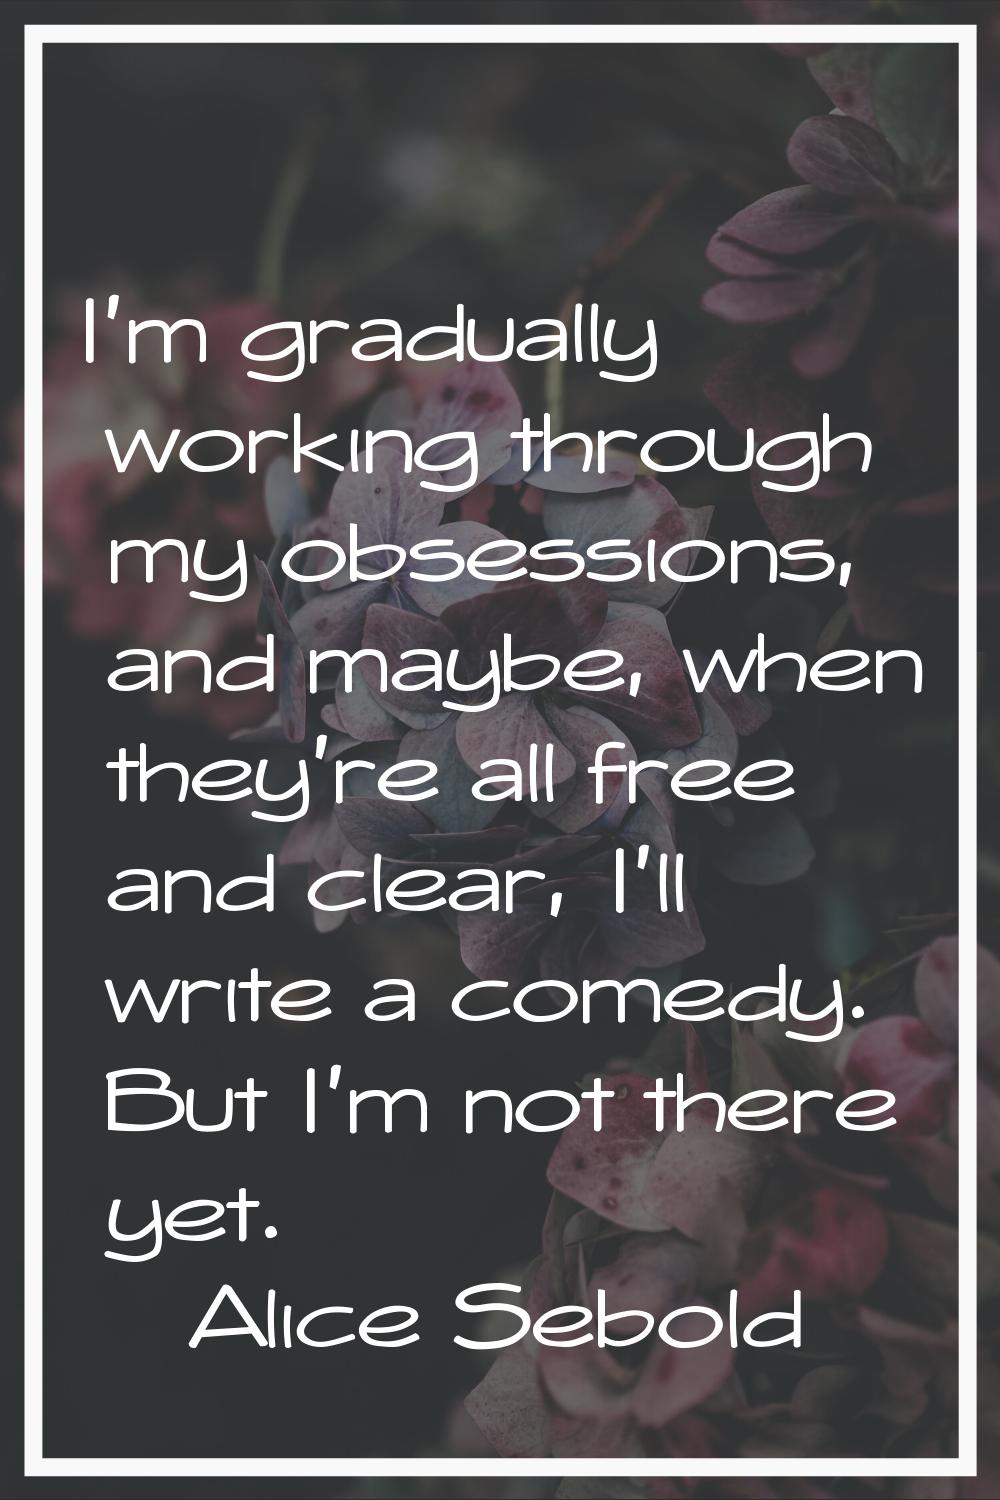 I'm gradually working through my obsessions, and maybe, when they're all free and clear, I'll write